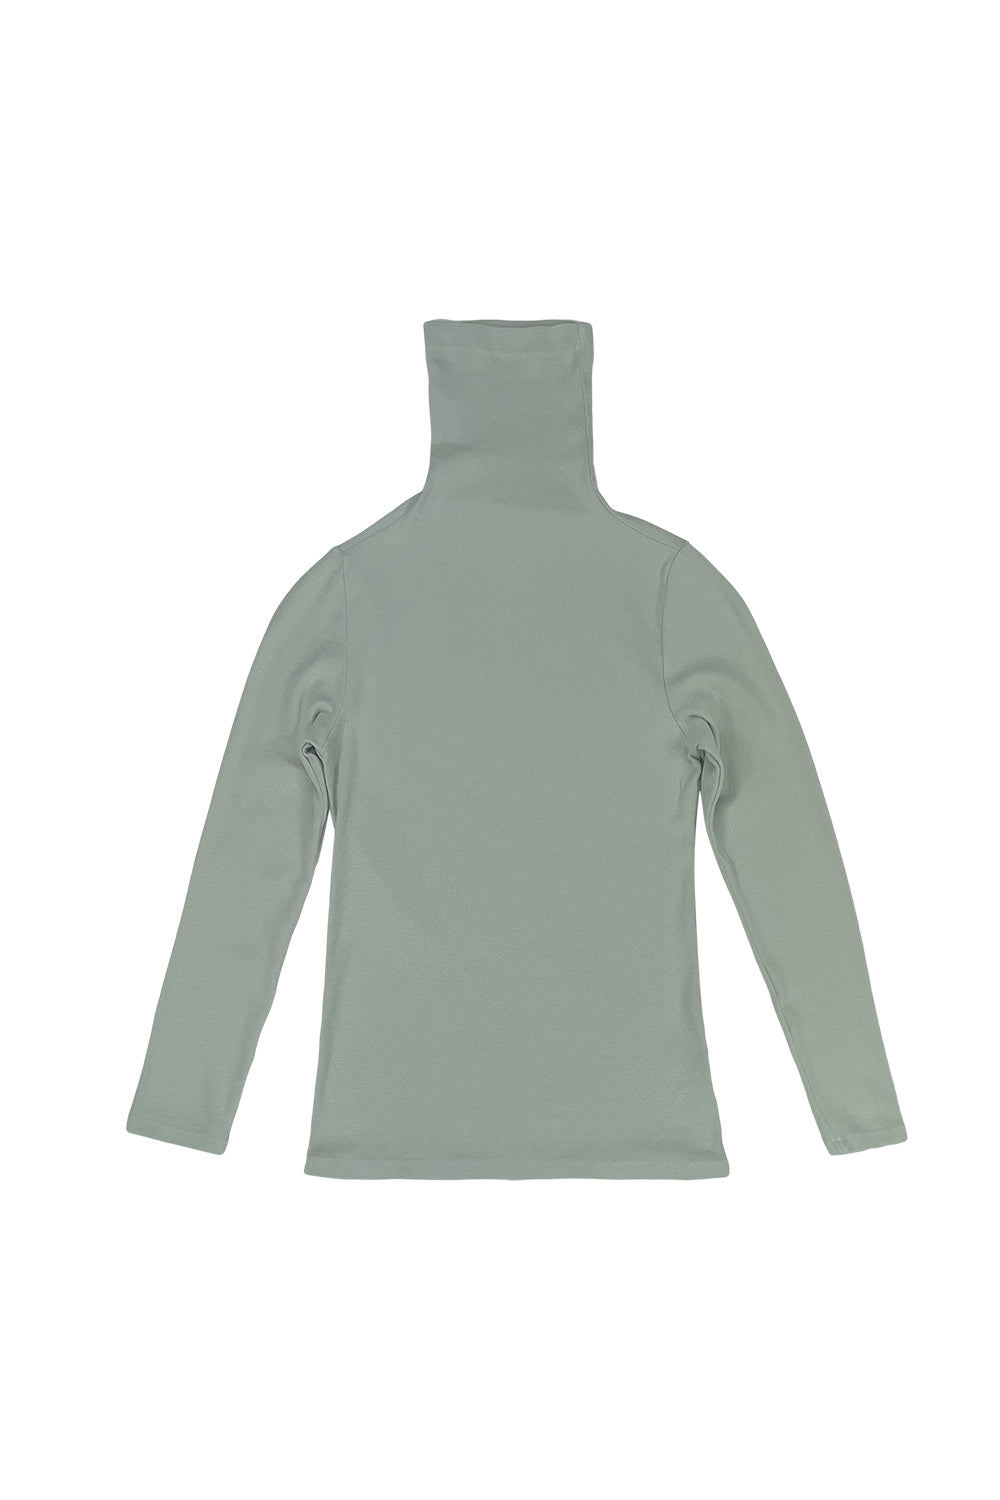 Whidbey Turtleneck  Jungmaven Hemp Clothing & Accessories - USA Made